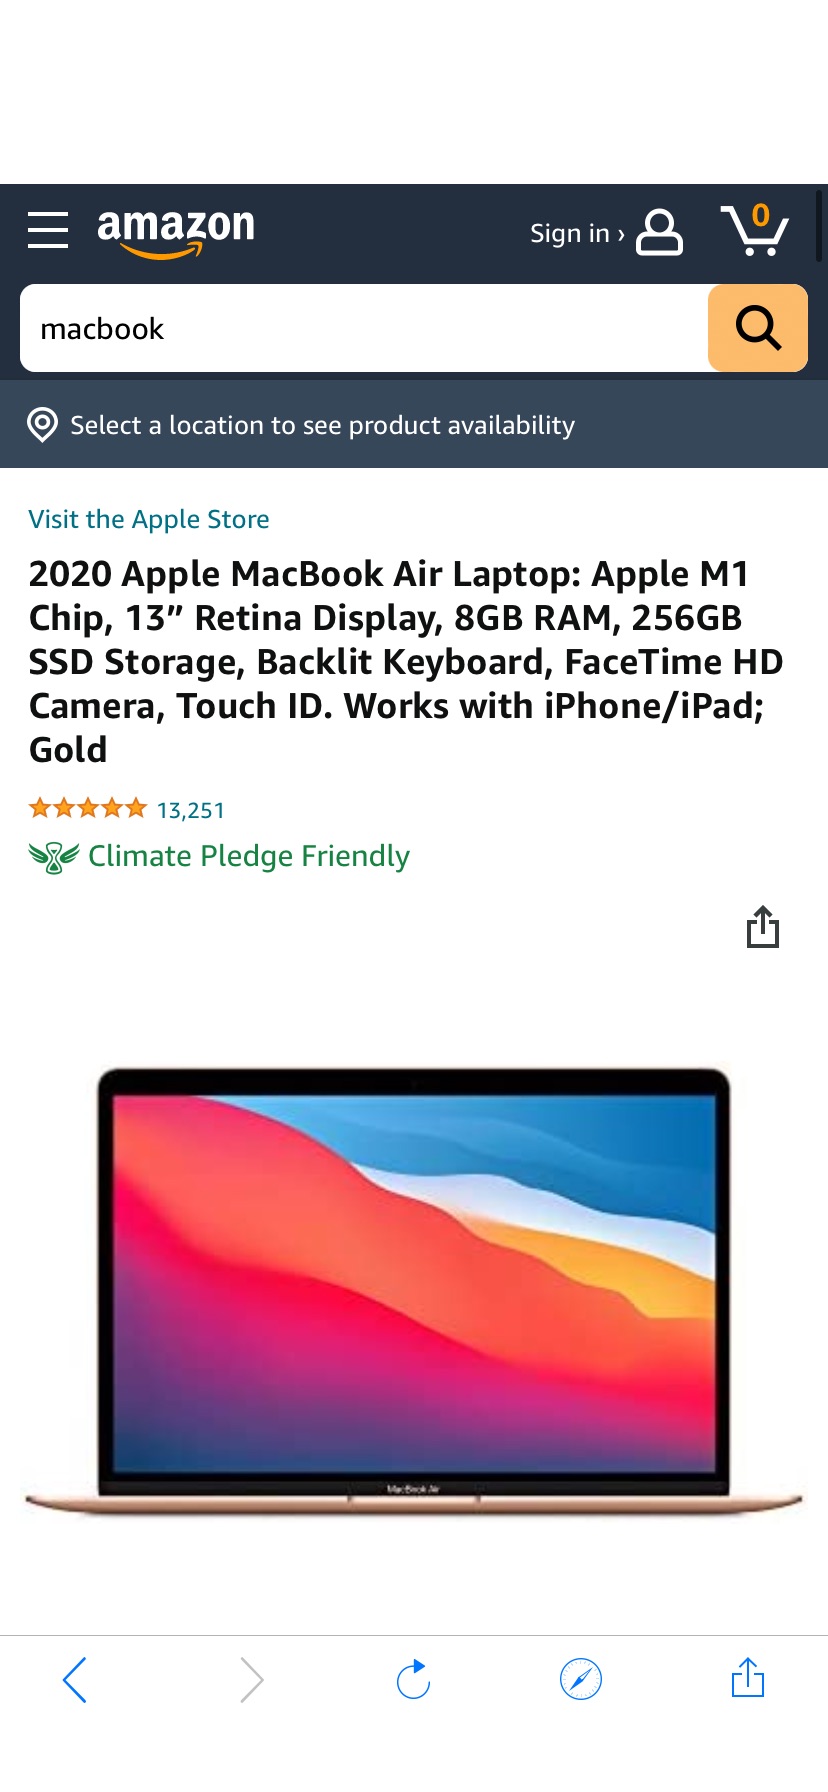 Amazon.com: 2020 Apple MacBook Air Laptop: Apple M1 Chip, 13” Retina Display, 8GB RAM, 256GB SSD Storage, Backlit Keyboard, FaceTime HD Camera, Touch ID. Works with iPhone/iPad; Silver : Electronics